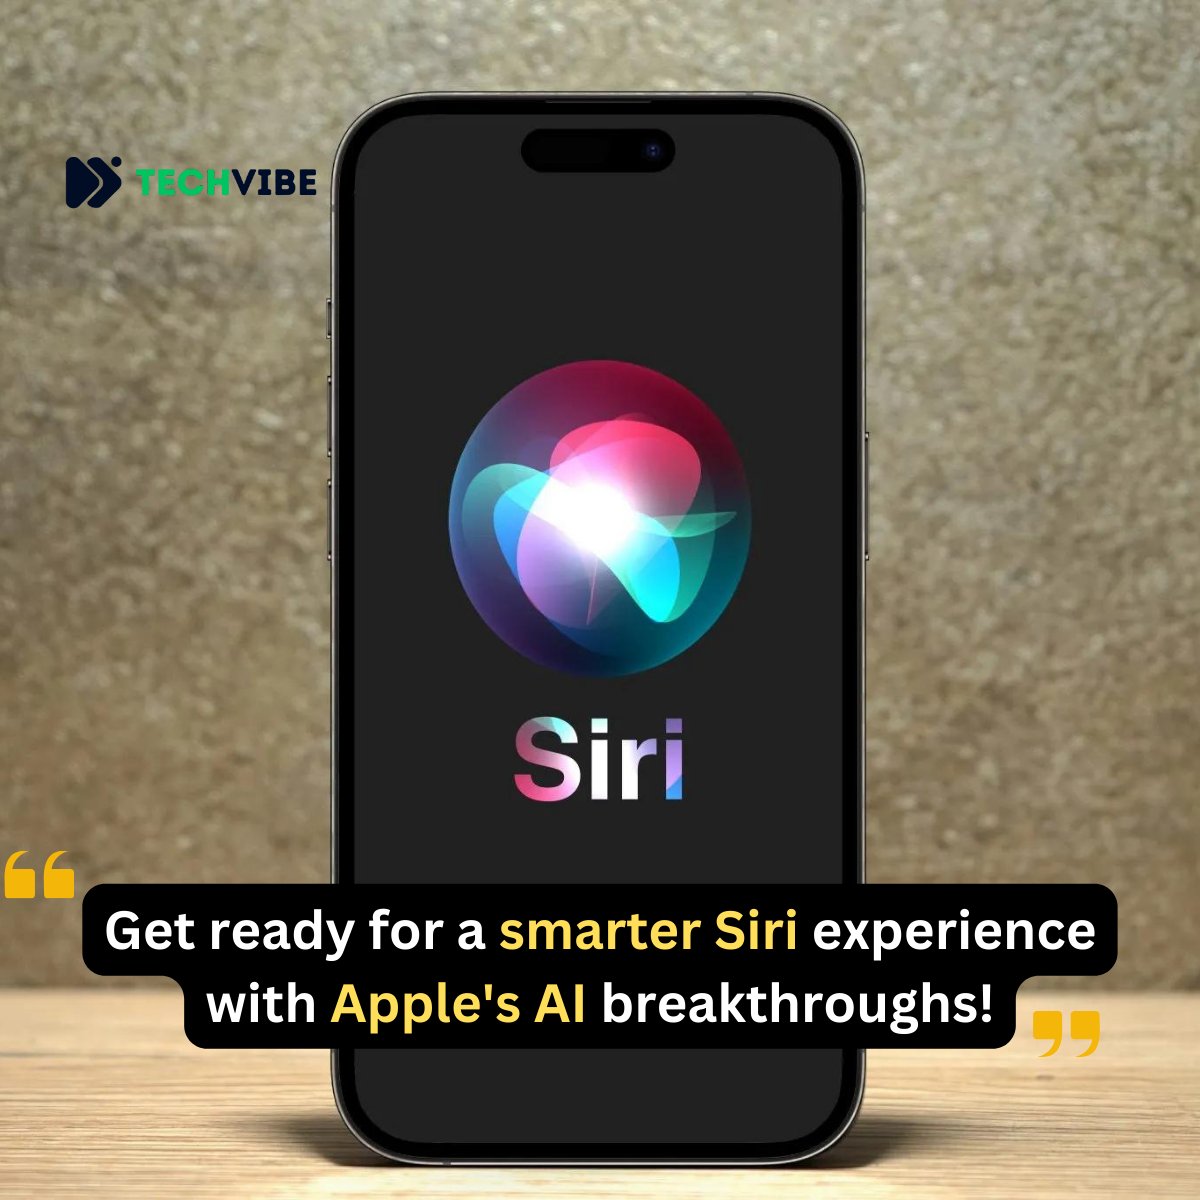 Experience the next level of AI innovation with Apple's groundbreaking advancements, making Siri smarter, faster, and more intuitive than ever before! more: t.ly/Vz6FG #Siri #Apple #AI #AInews